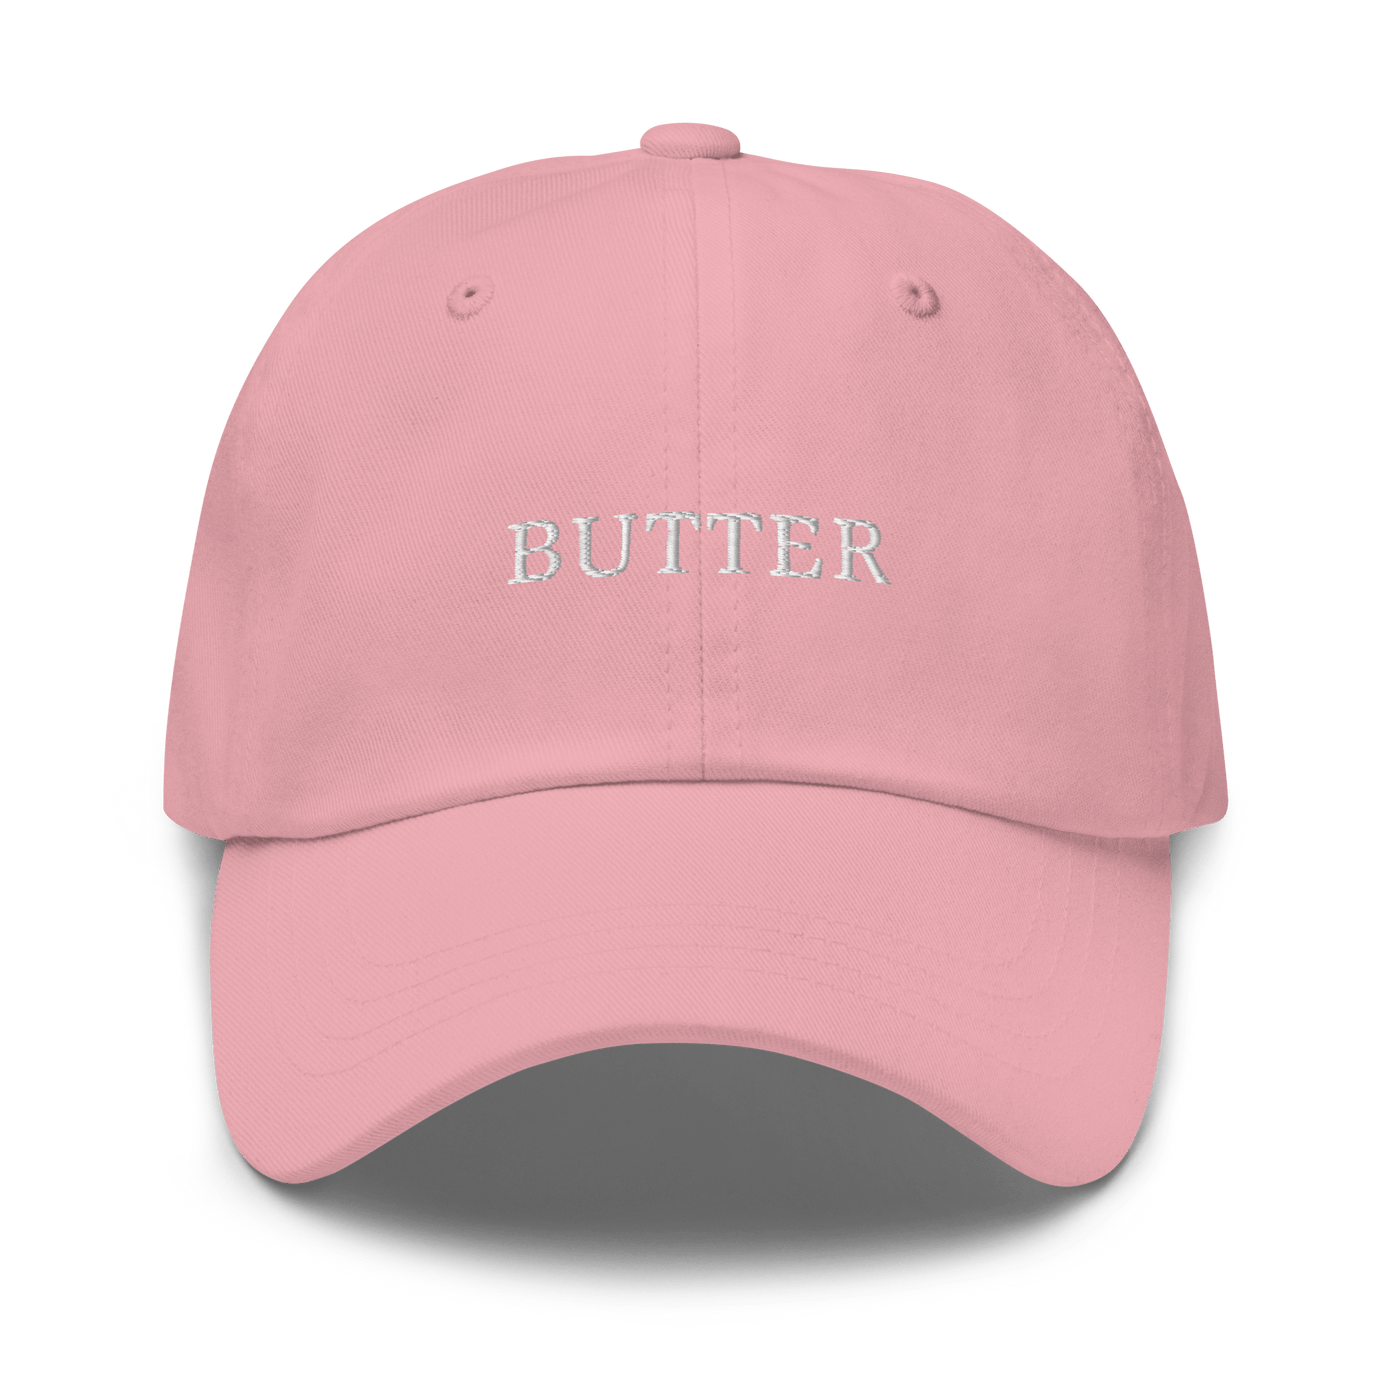 Butter Dad hat - Navy - - Just Another Cap Store